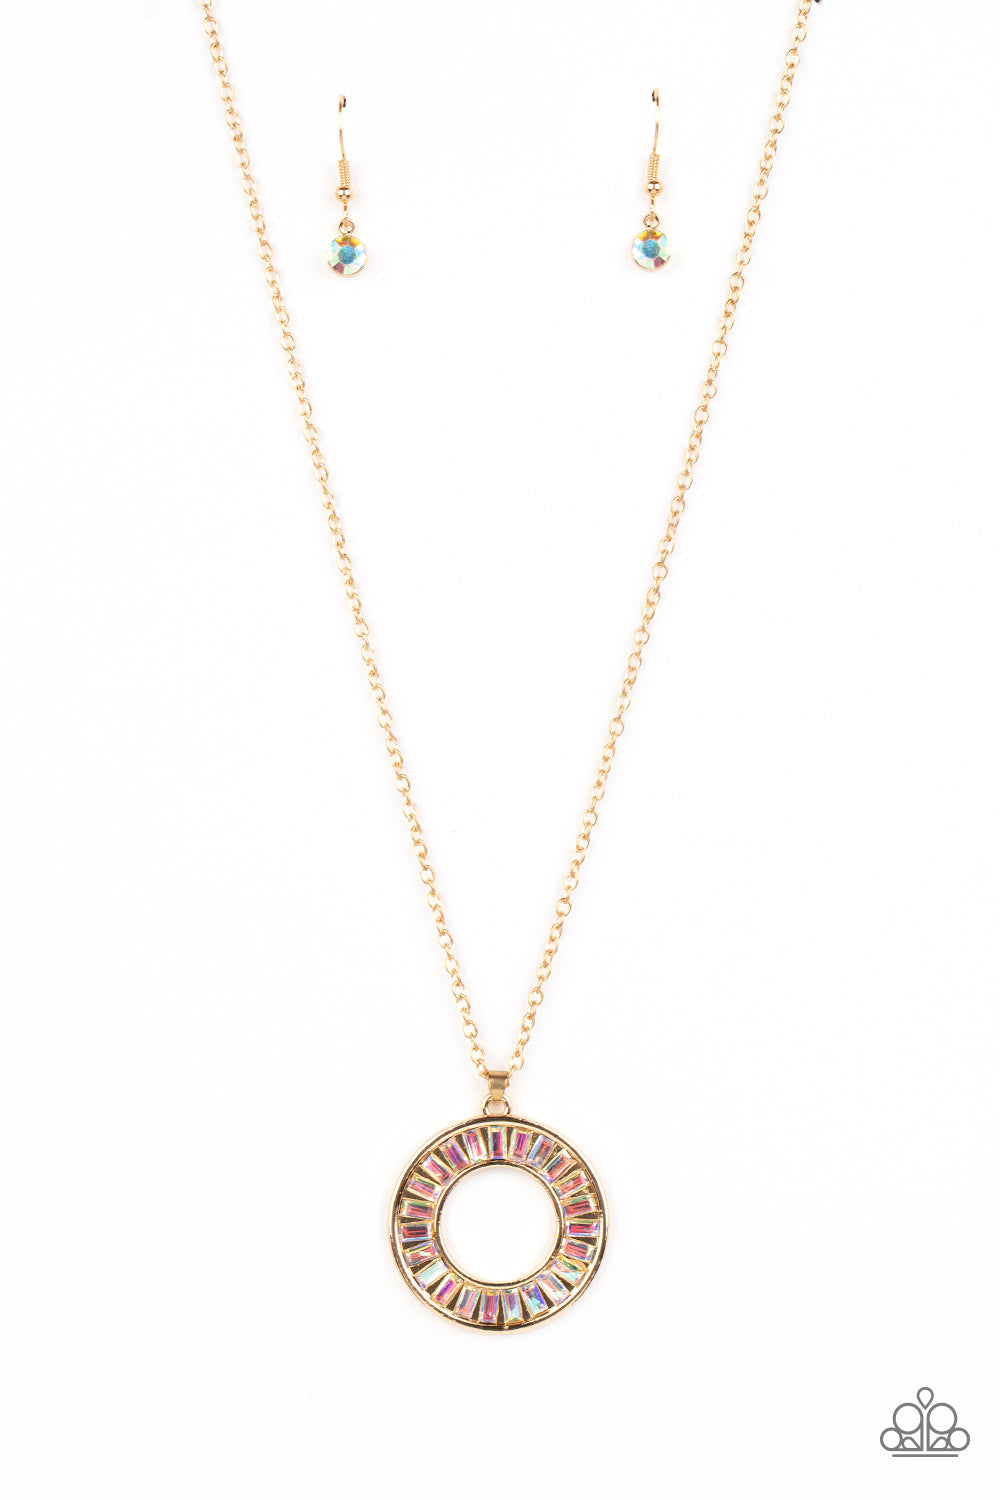 Clique Couture - Gold Circular Frame/Iridescent Rhinestone Pendant Paparazzi Necklace & matching earrings